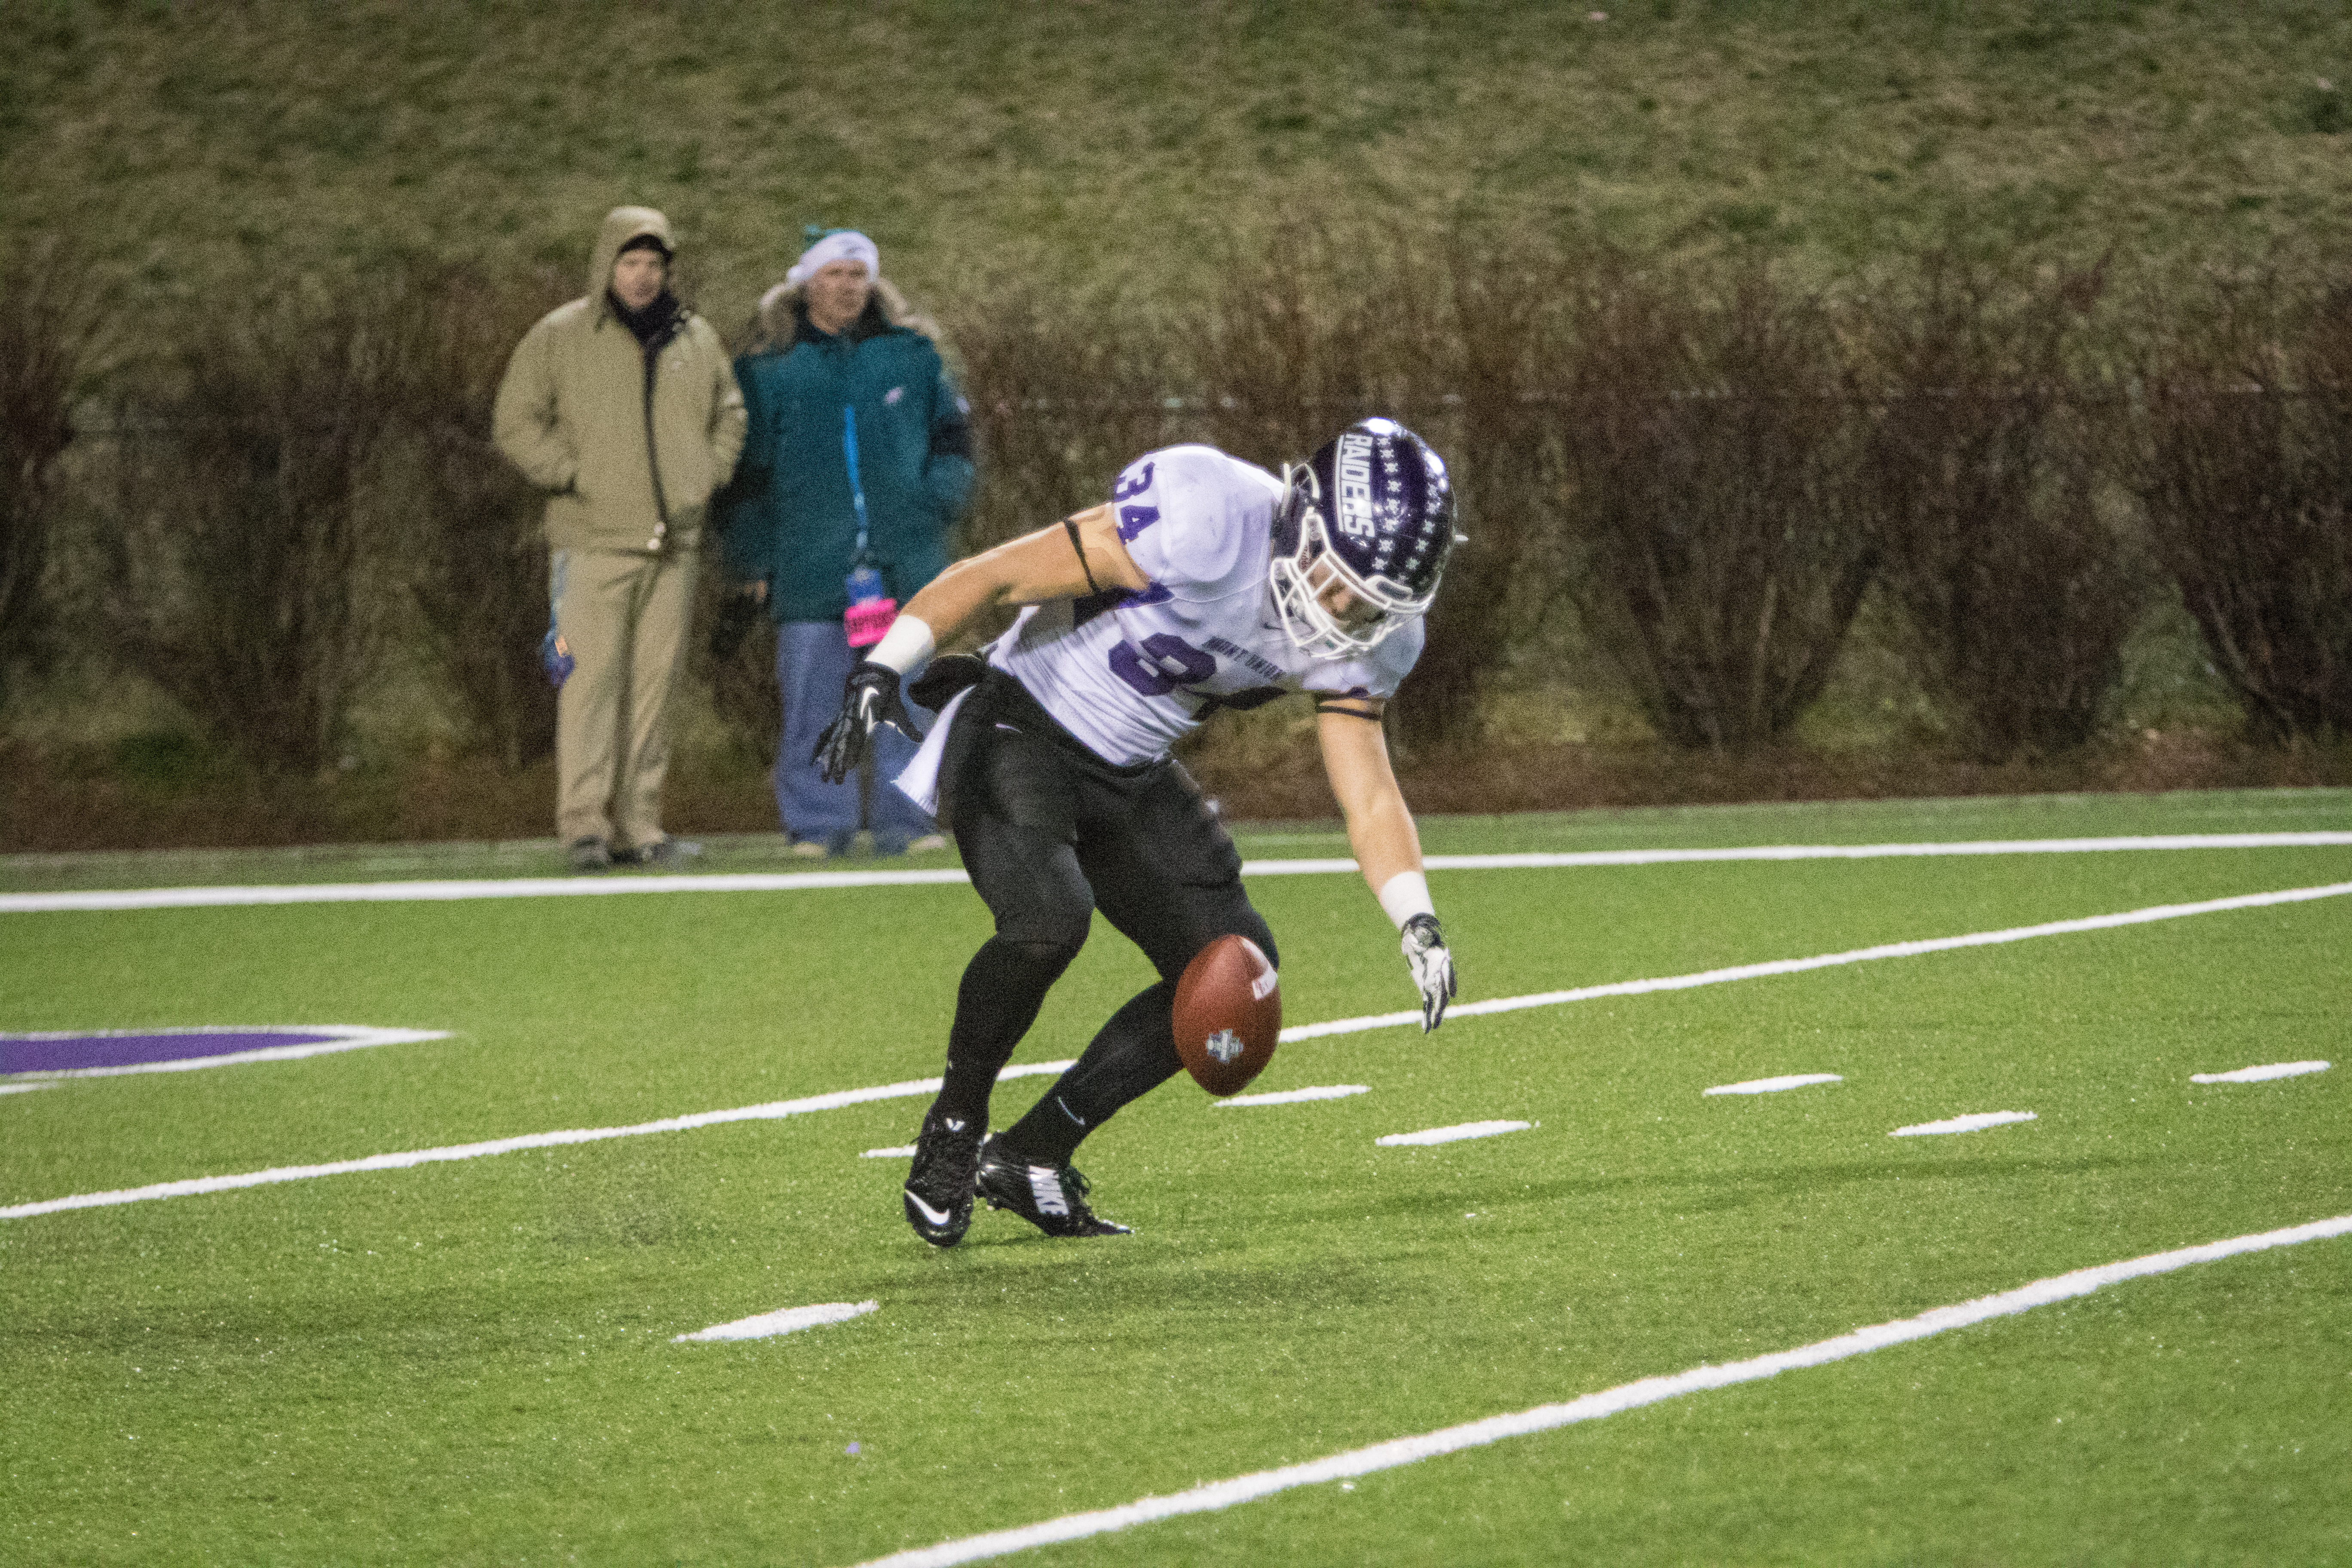 Stagg Bowl